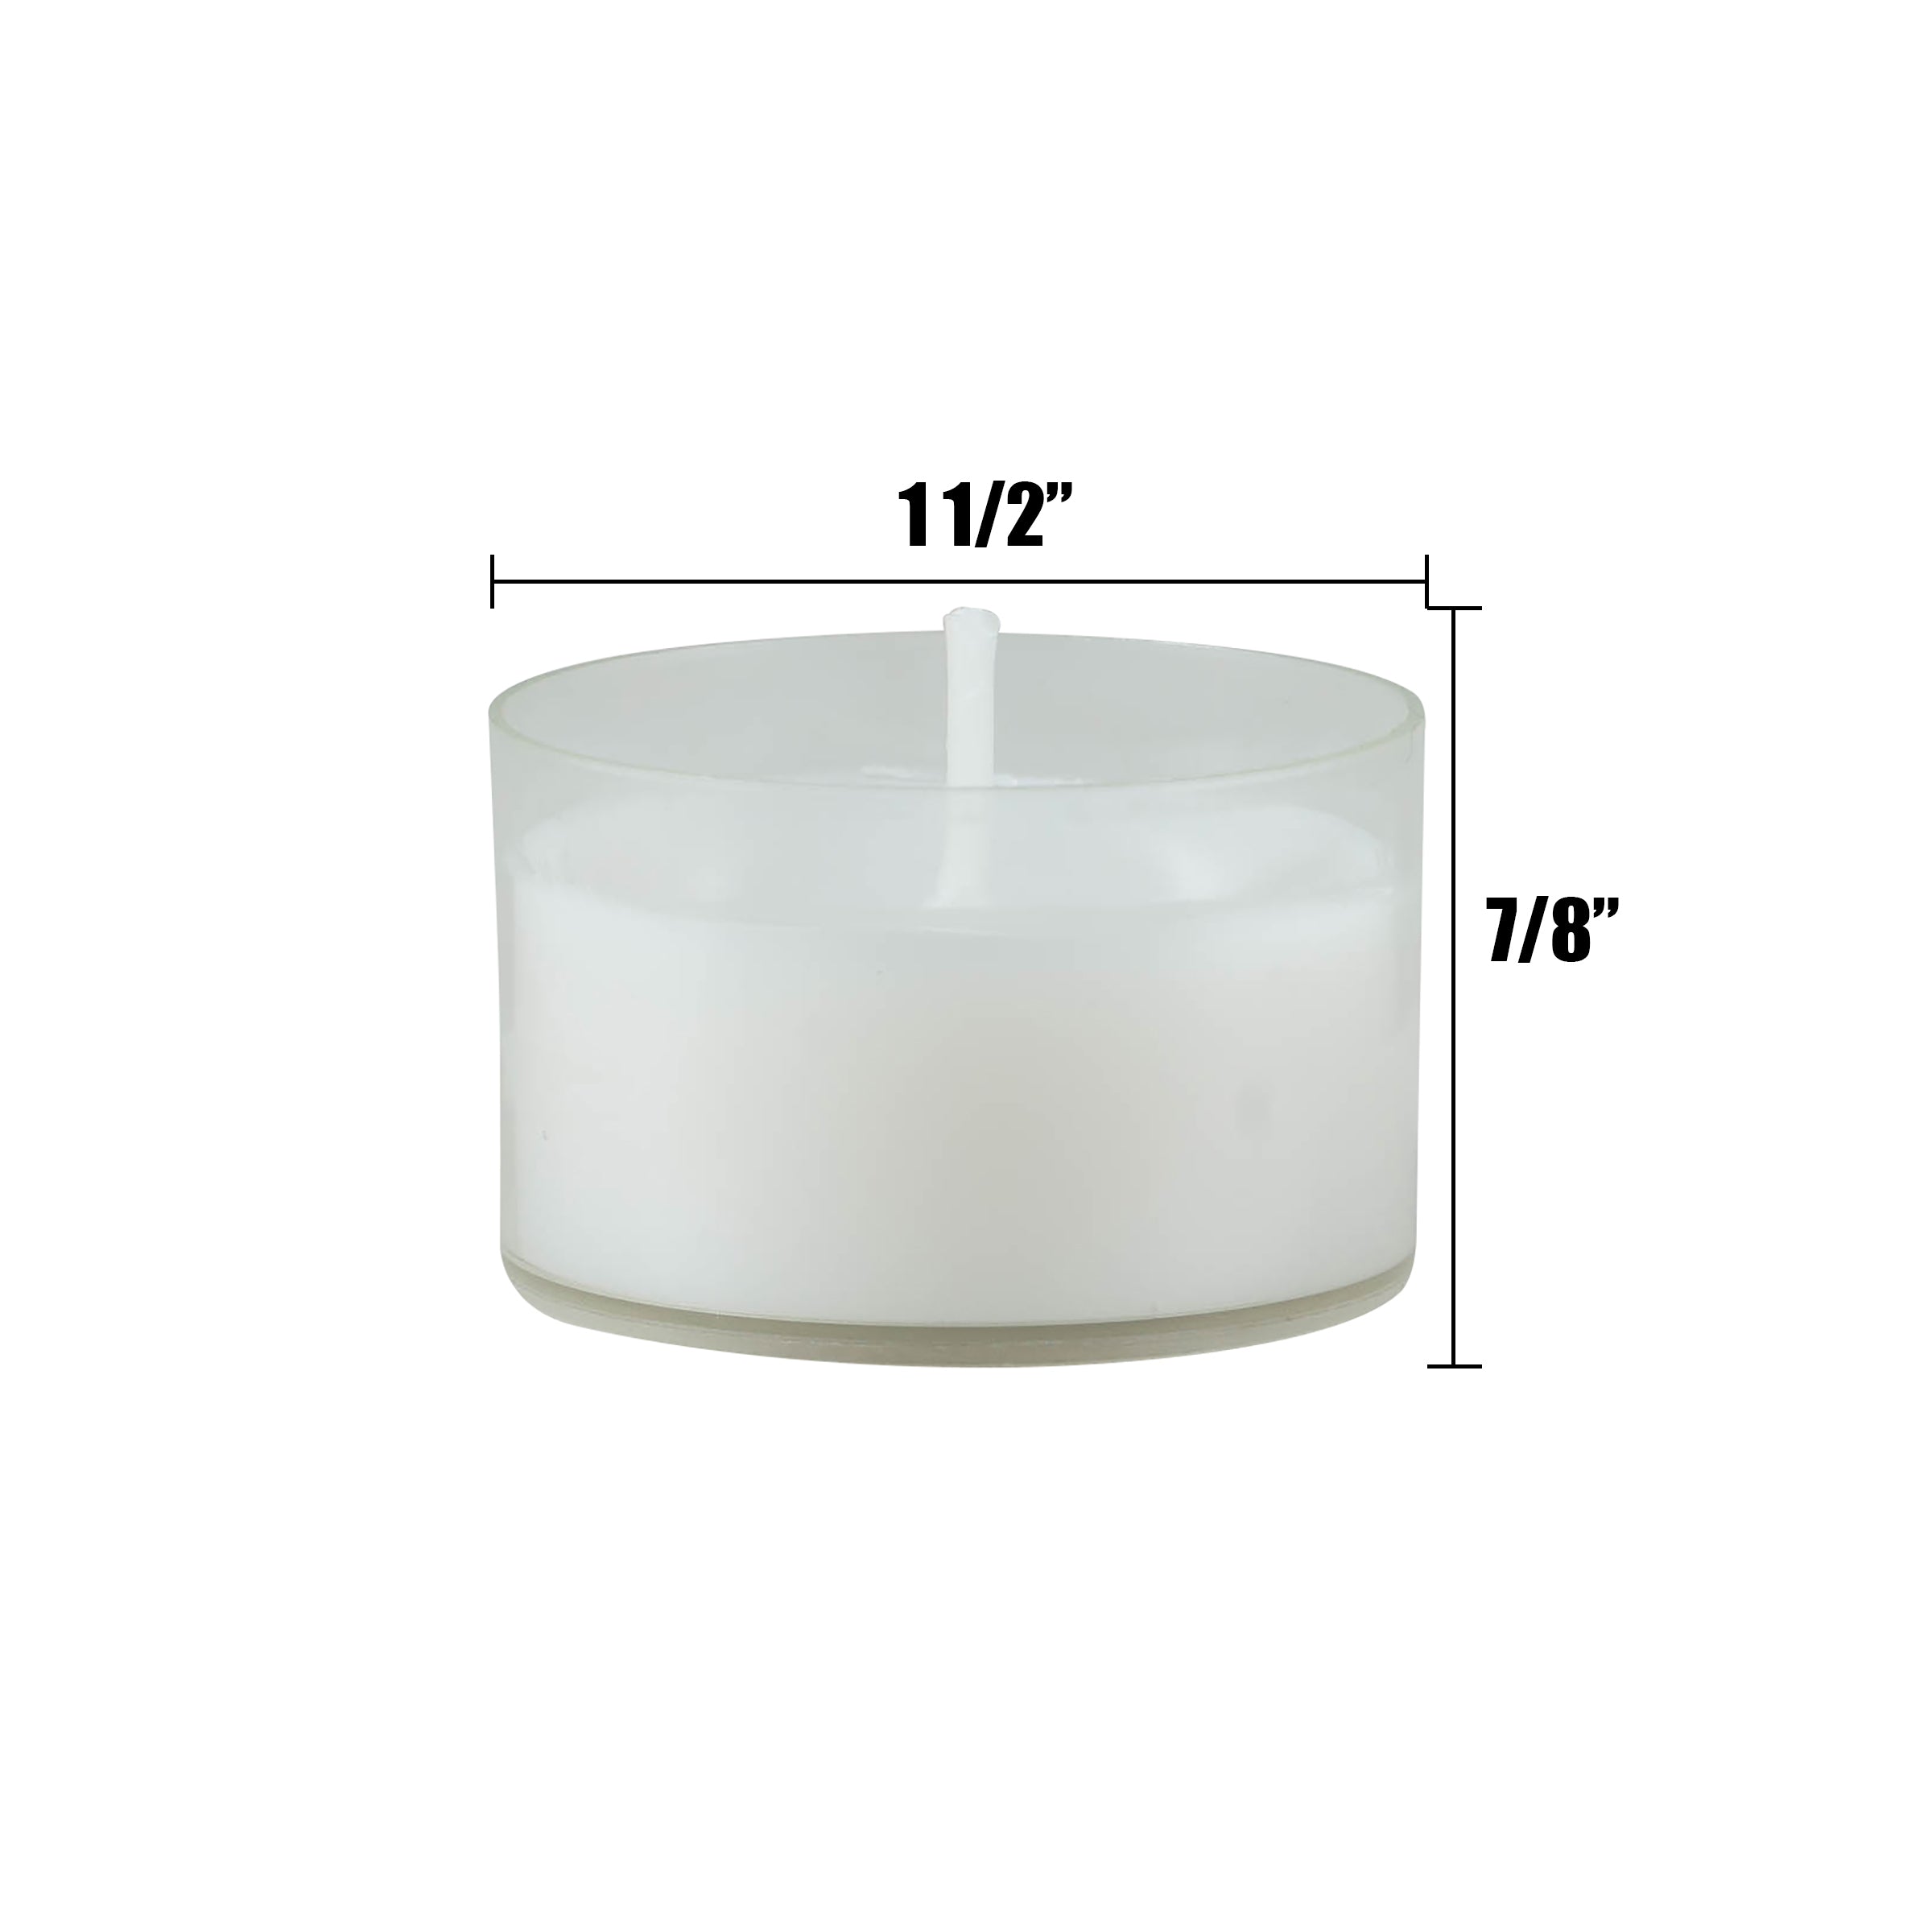 6 to 7 Hour Long Burning Unscented Clear Cup Tea Light Candles, White, Bulk  192 Pack